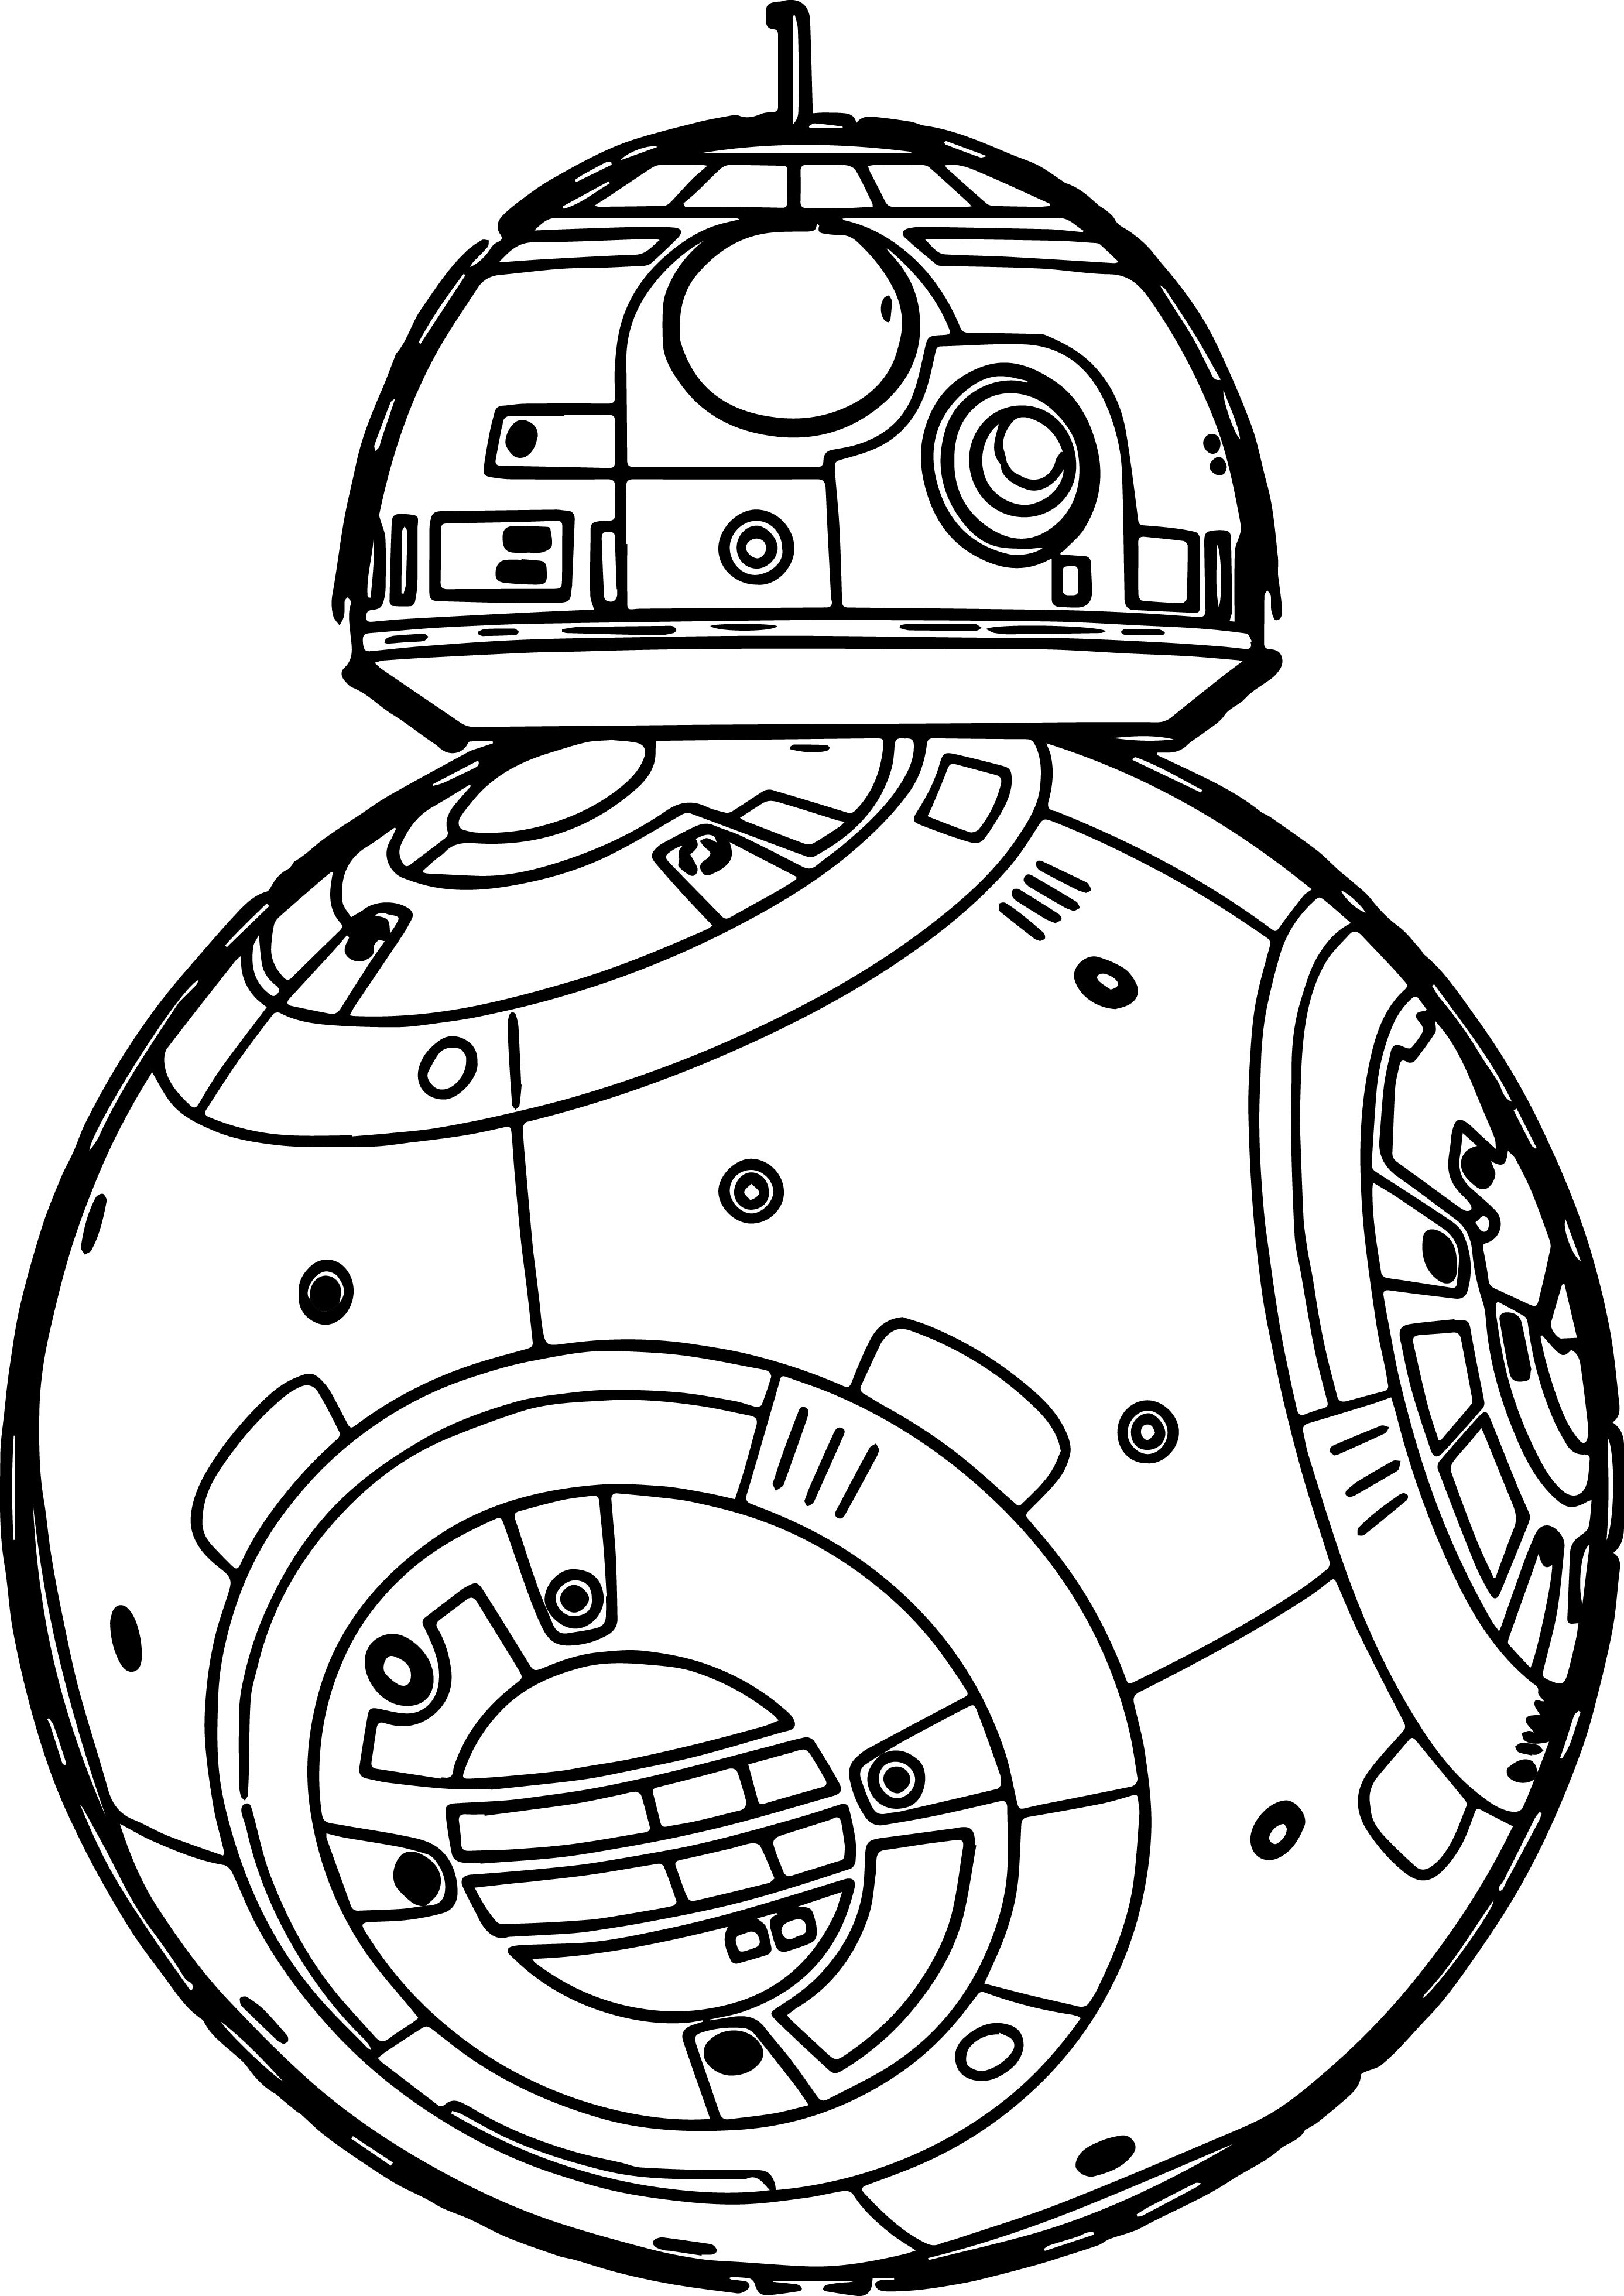 Easy Star Wars Coloring Pages at GetColorings.com | Free printable ...